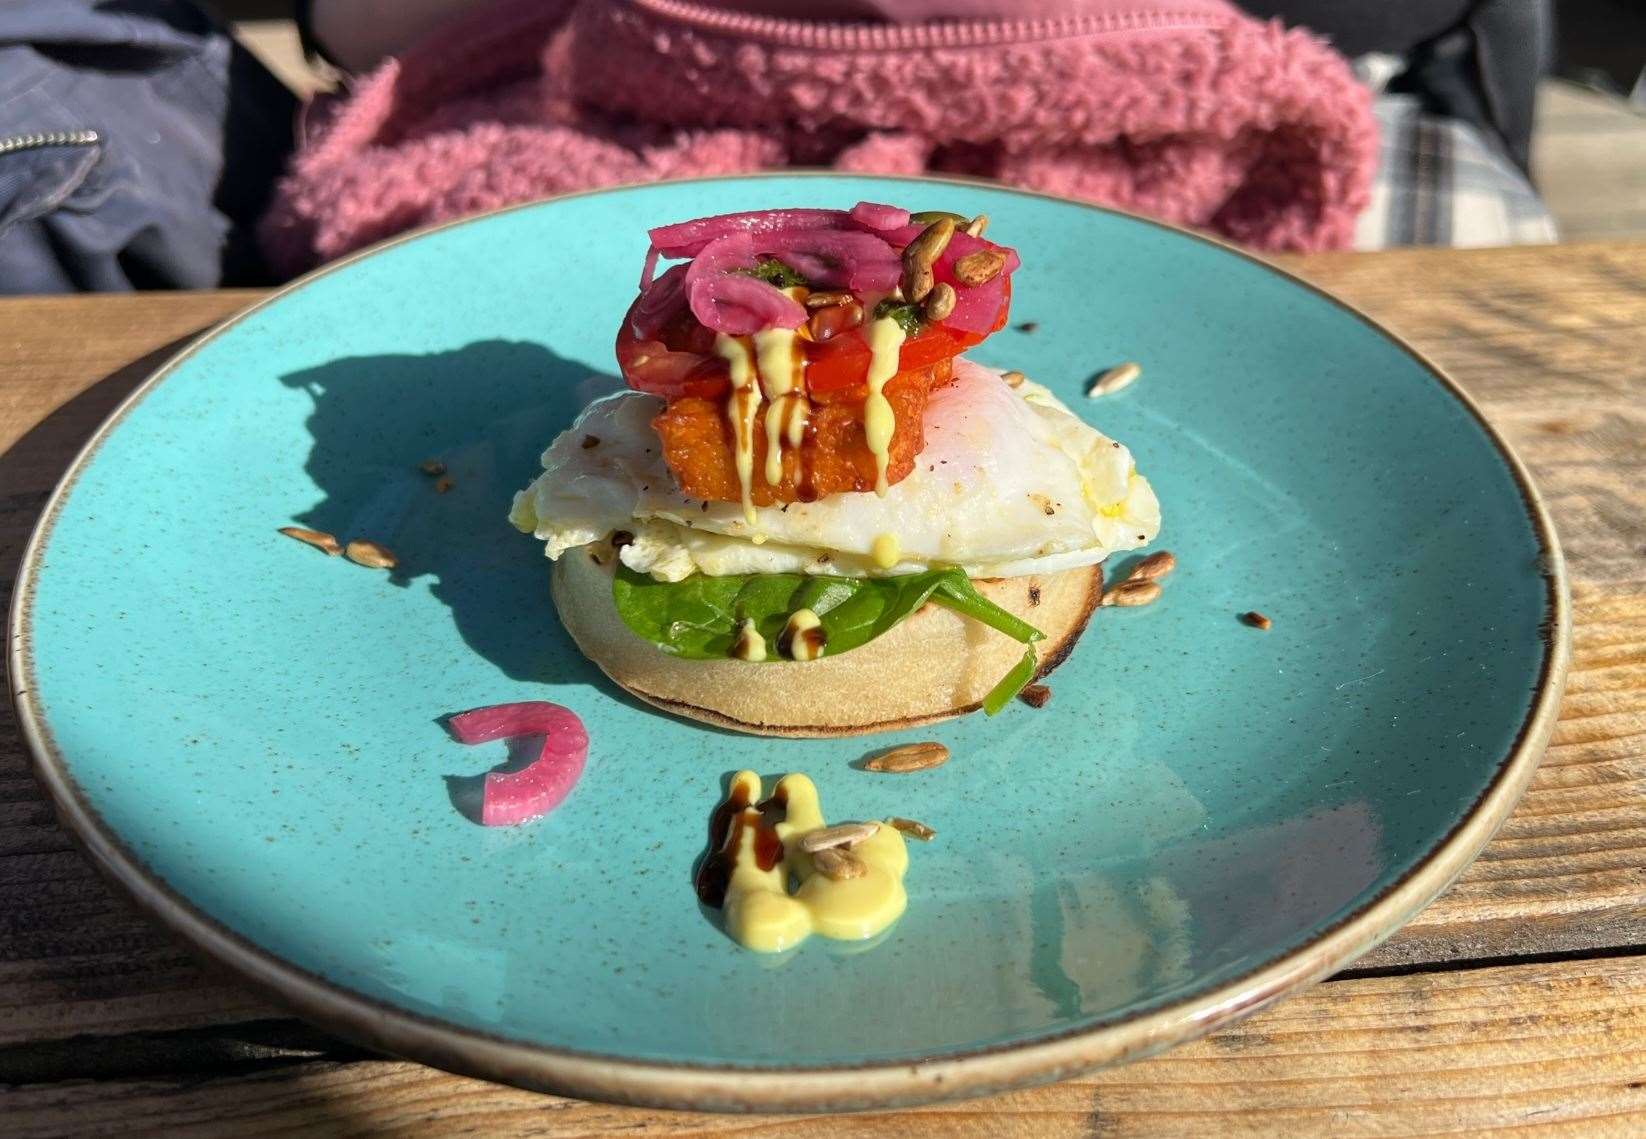 A Veggie Crumpet Slider - with eggs and halloumi. Yum